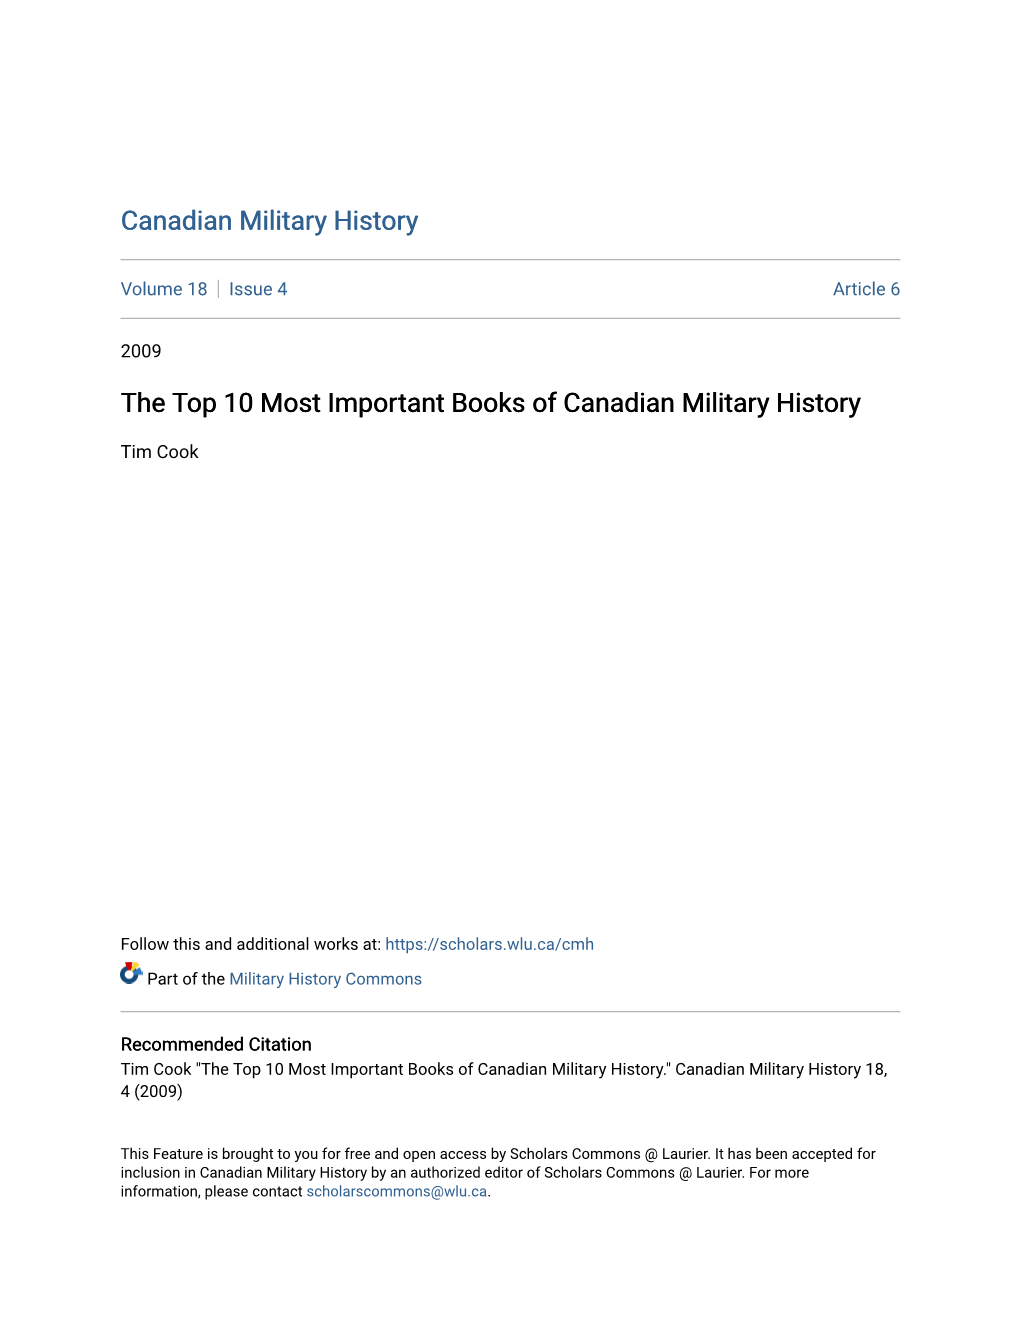 The Top 10 Most Important Books of Canadian Military History